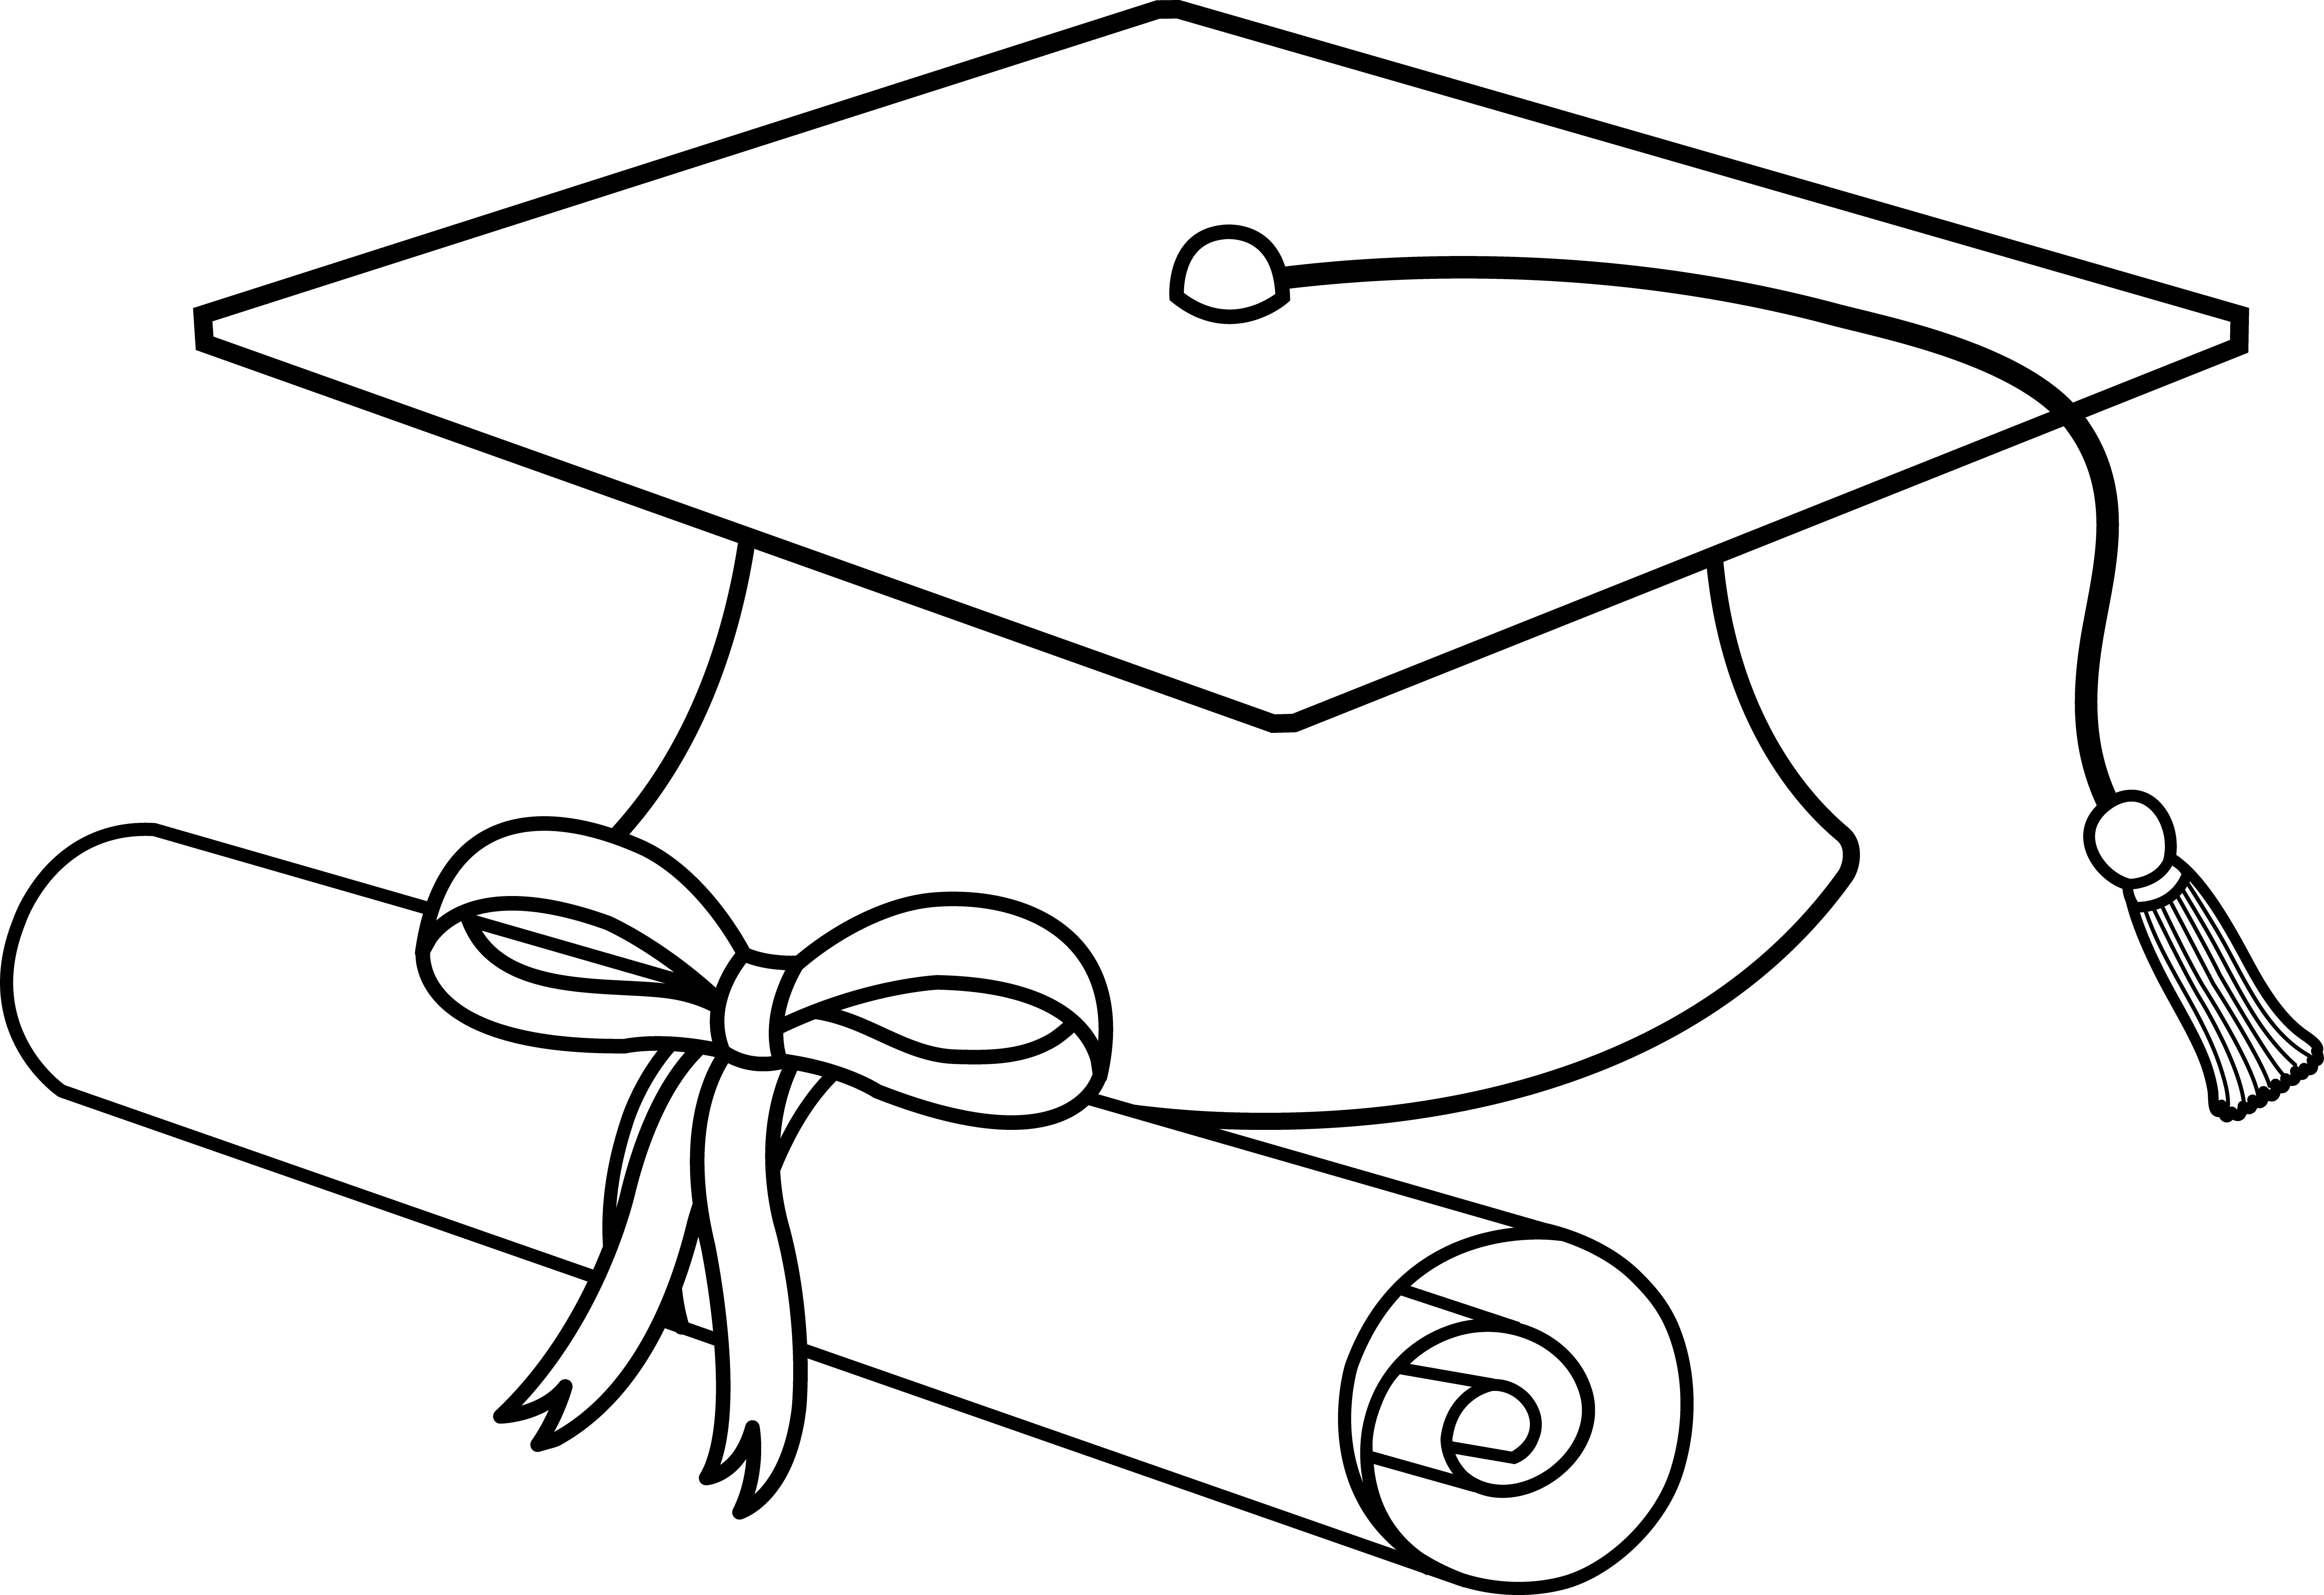 Graduation Clipart Black And White Images  Pictures - Becuo